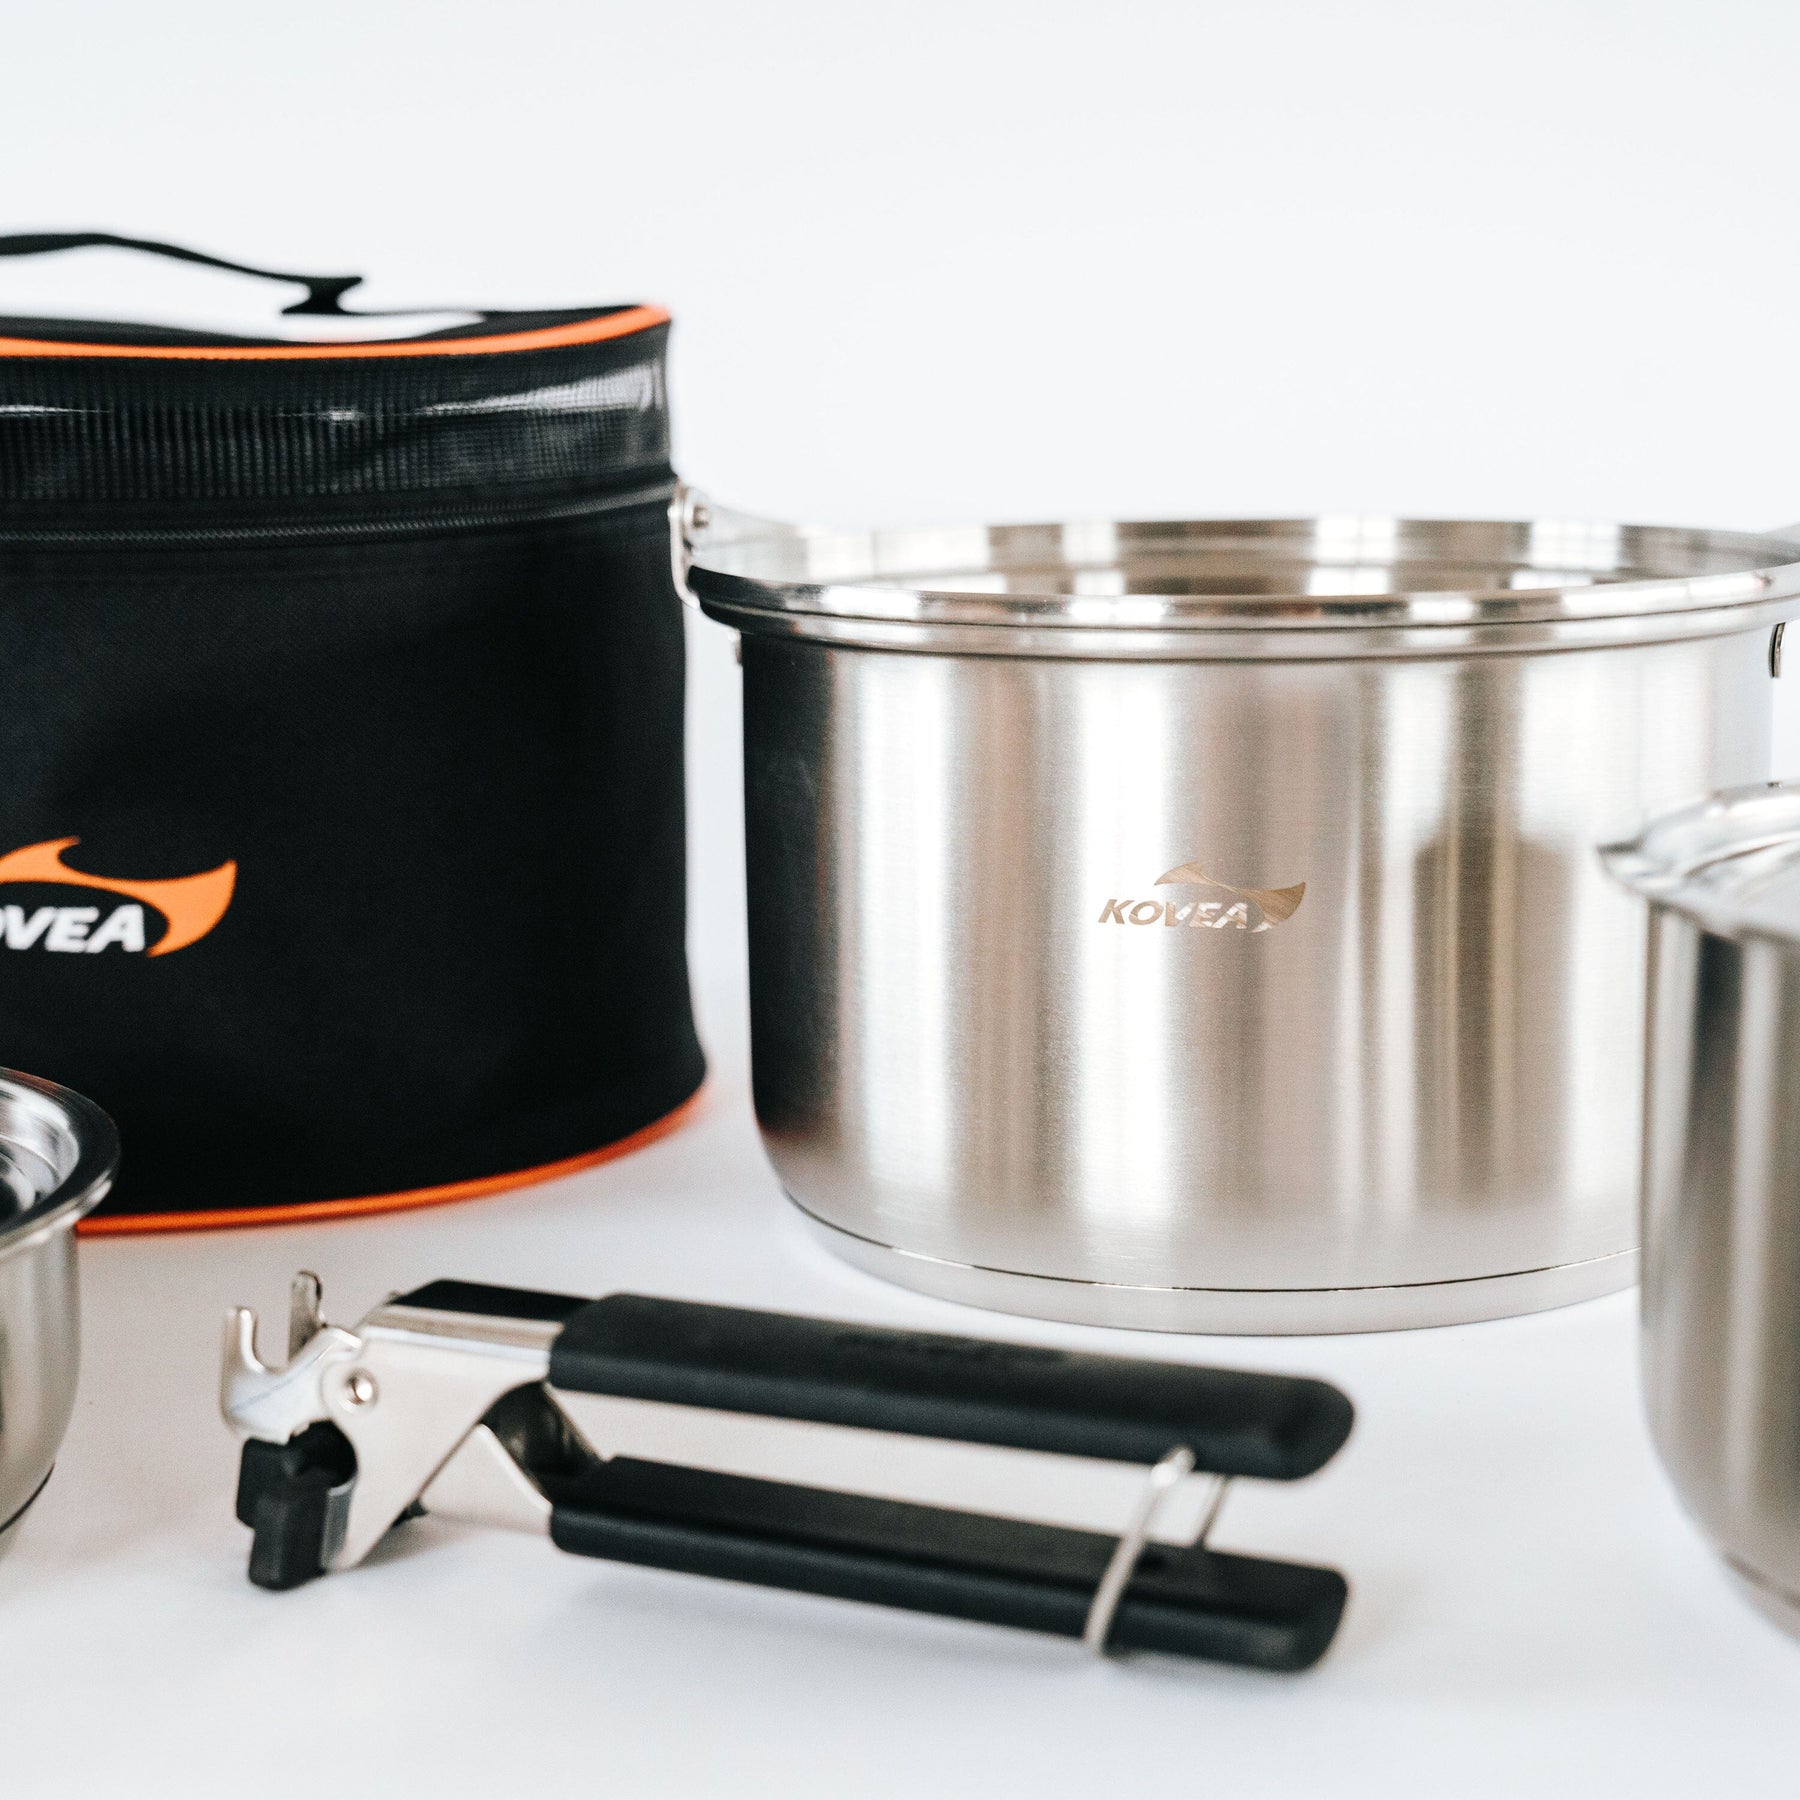 Triple Stainless Cookware L  Cookware Kovea- Adventure Imports